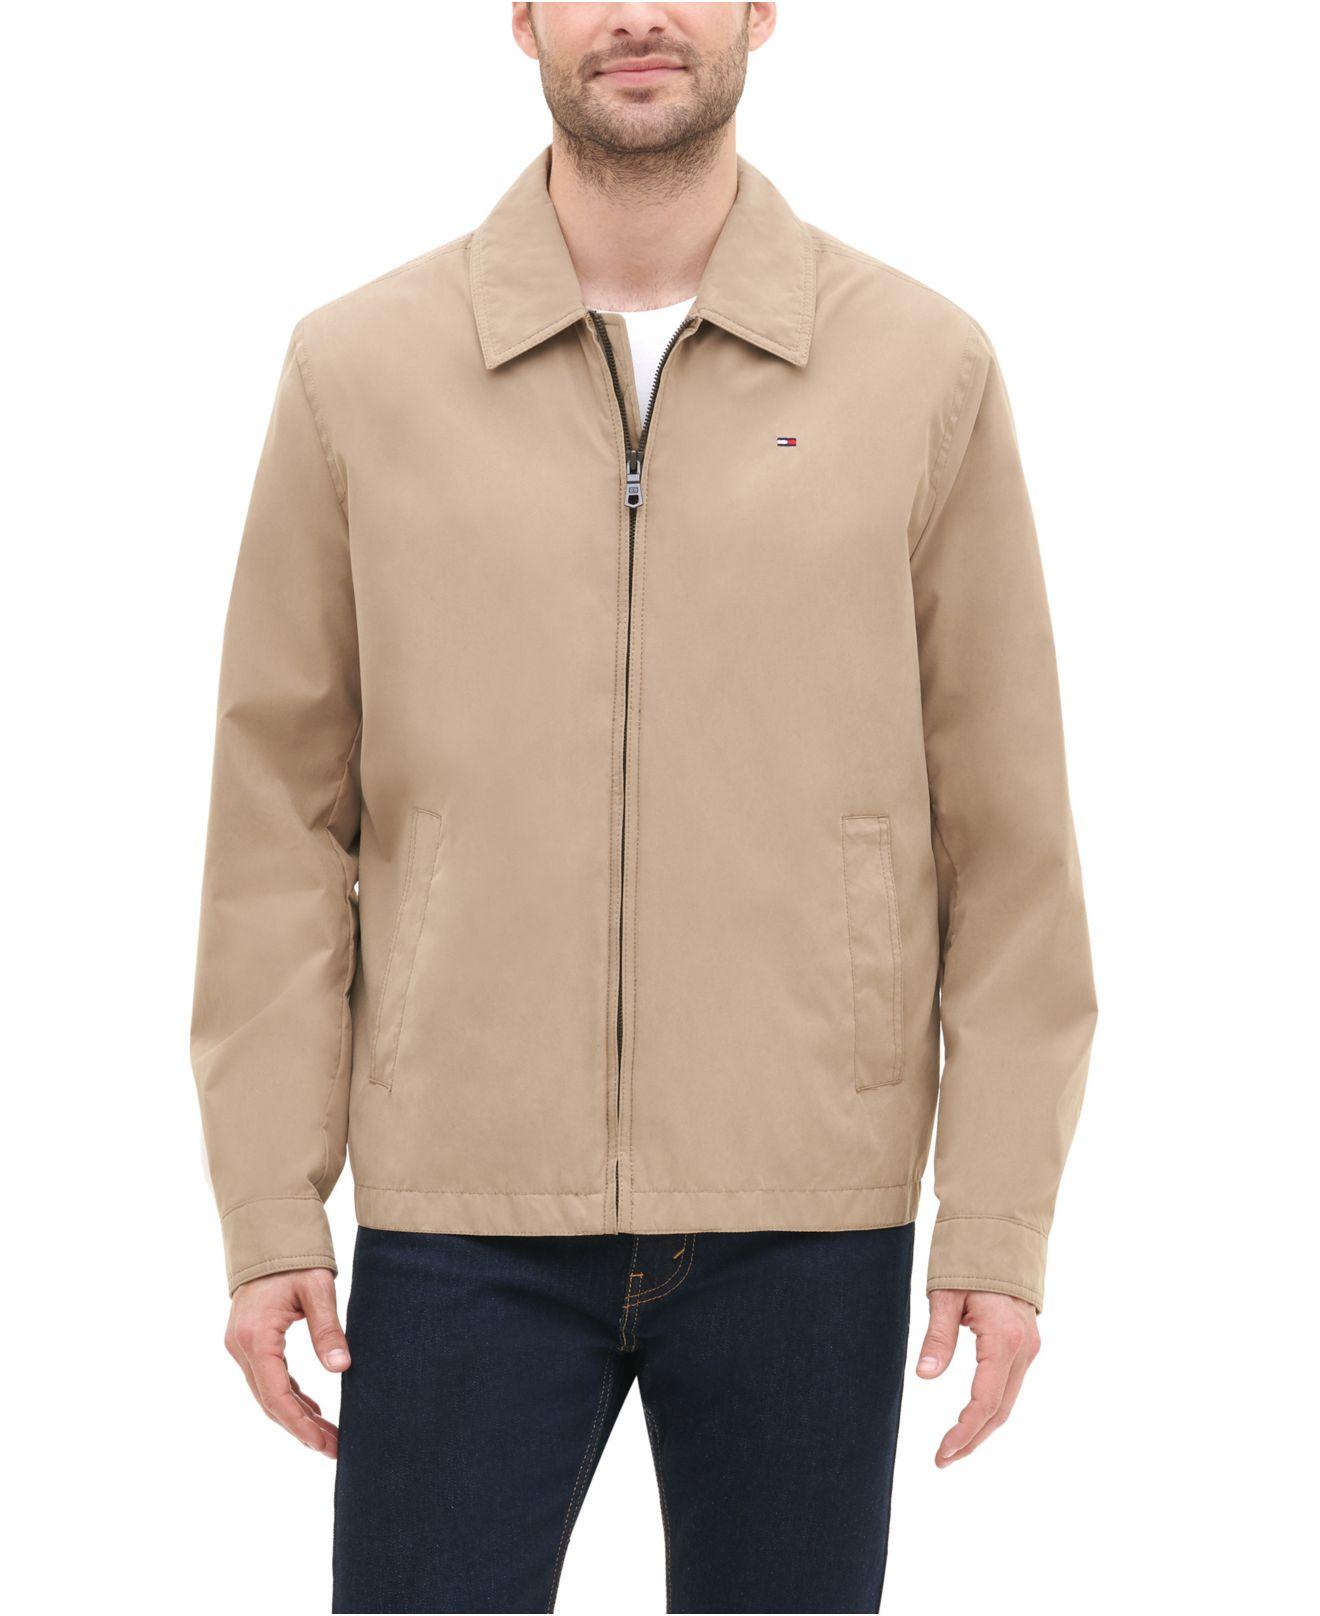 Tommy Hilfiger Mens Micro-Twill Open-Bottom Zip-Front Jacket